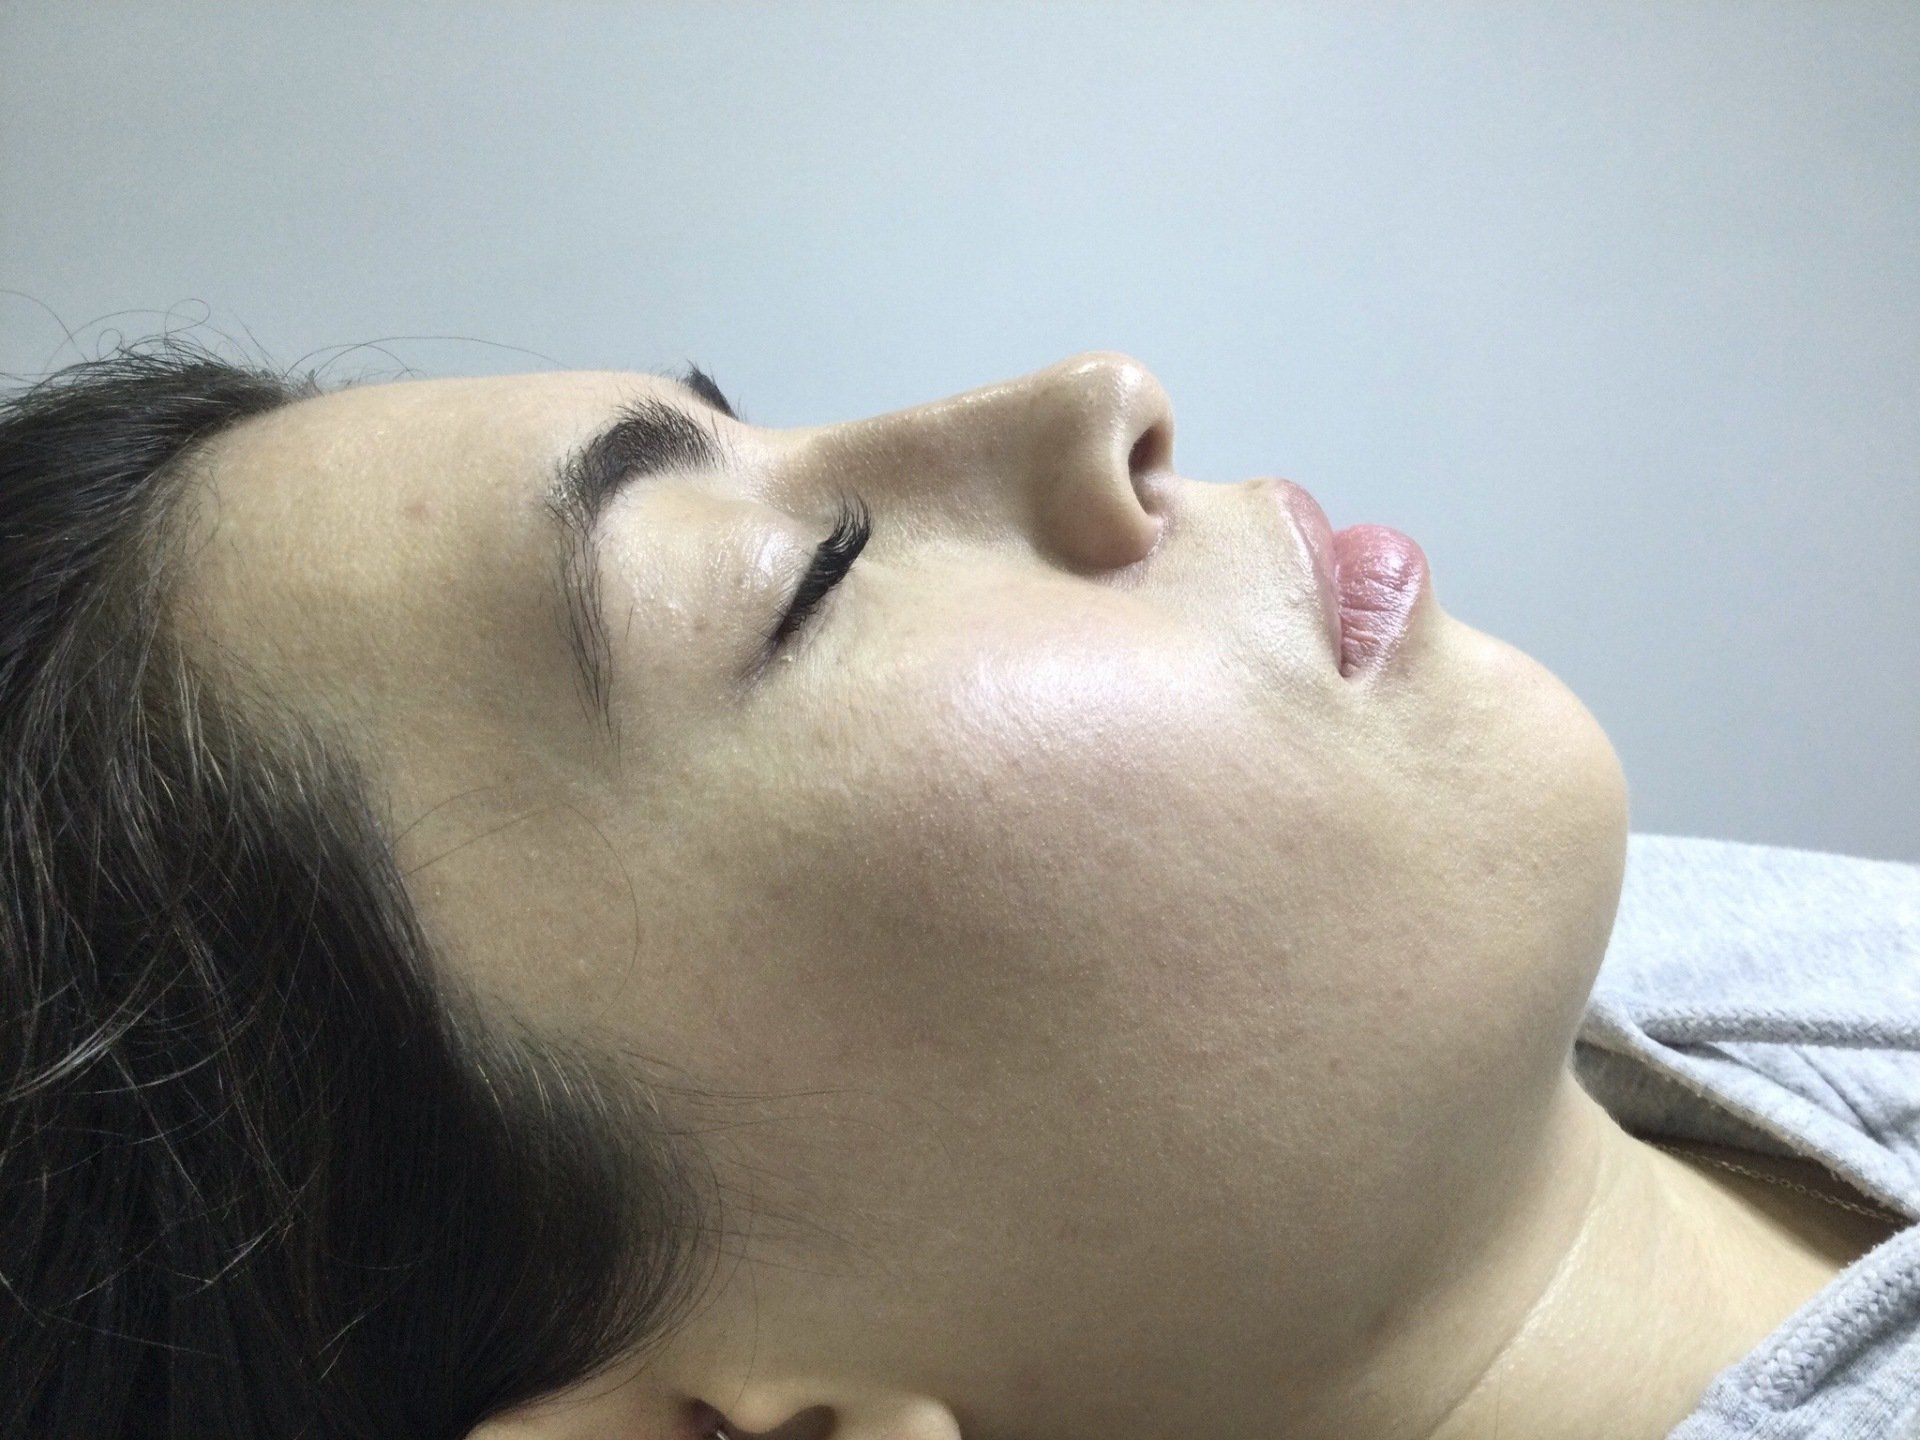 Rhinoplasty Nose Fillers 3 - After